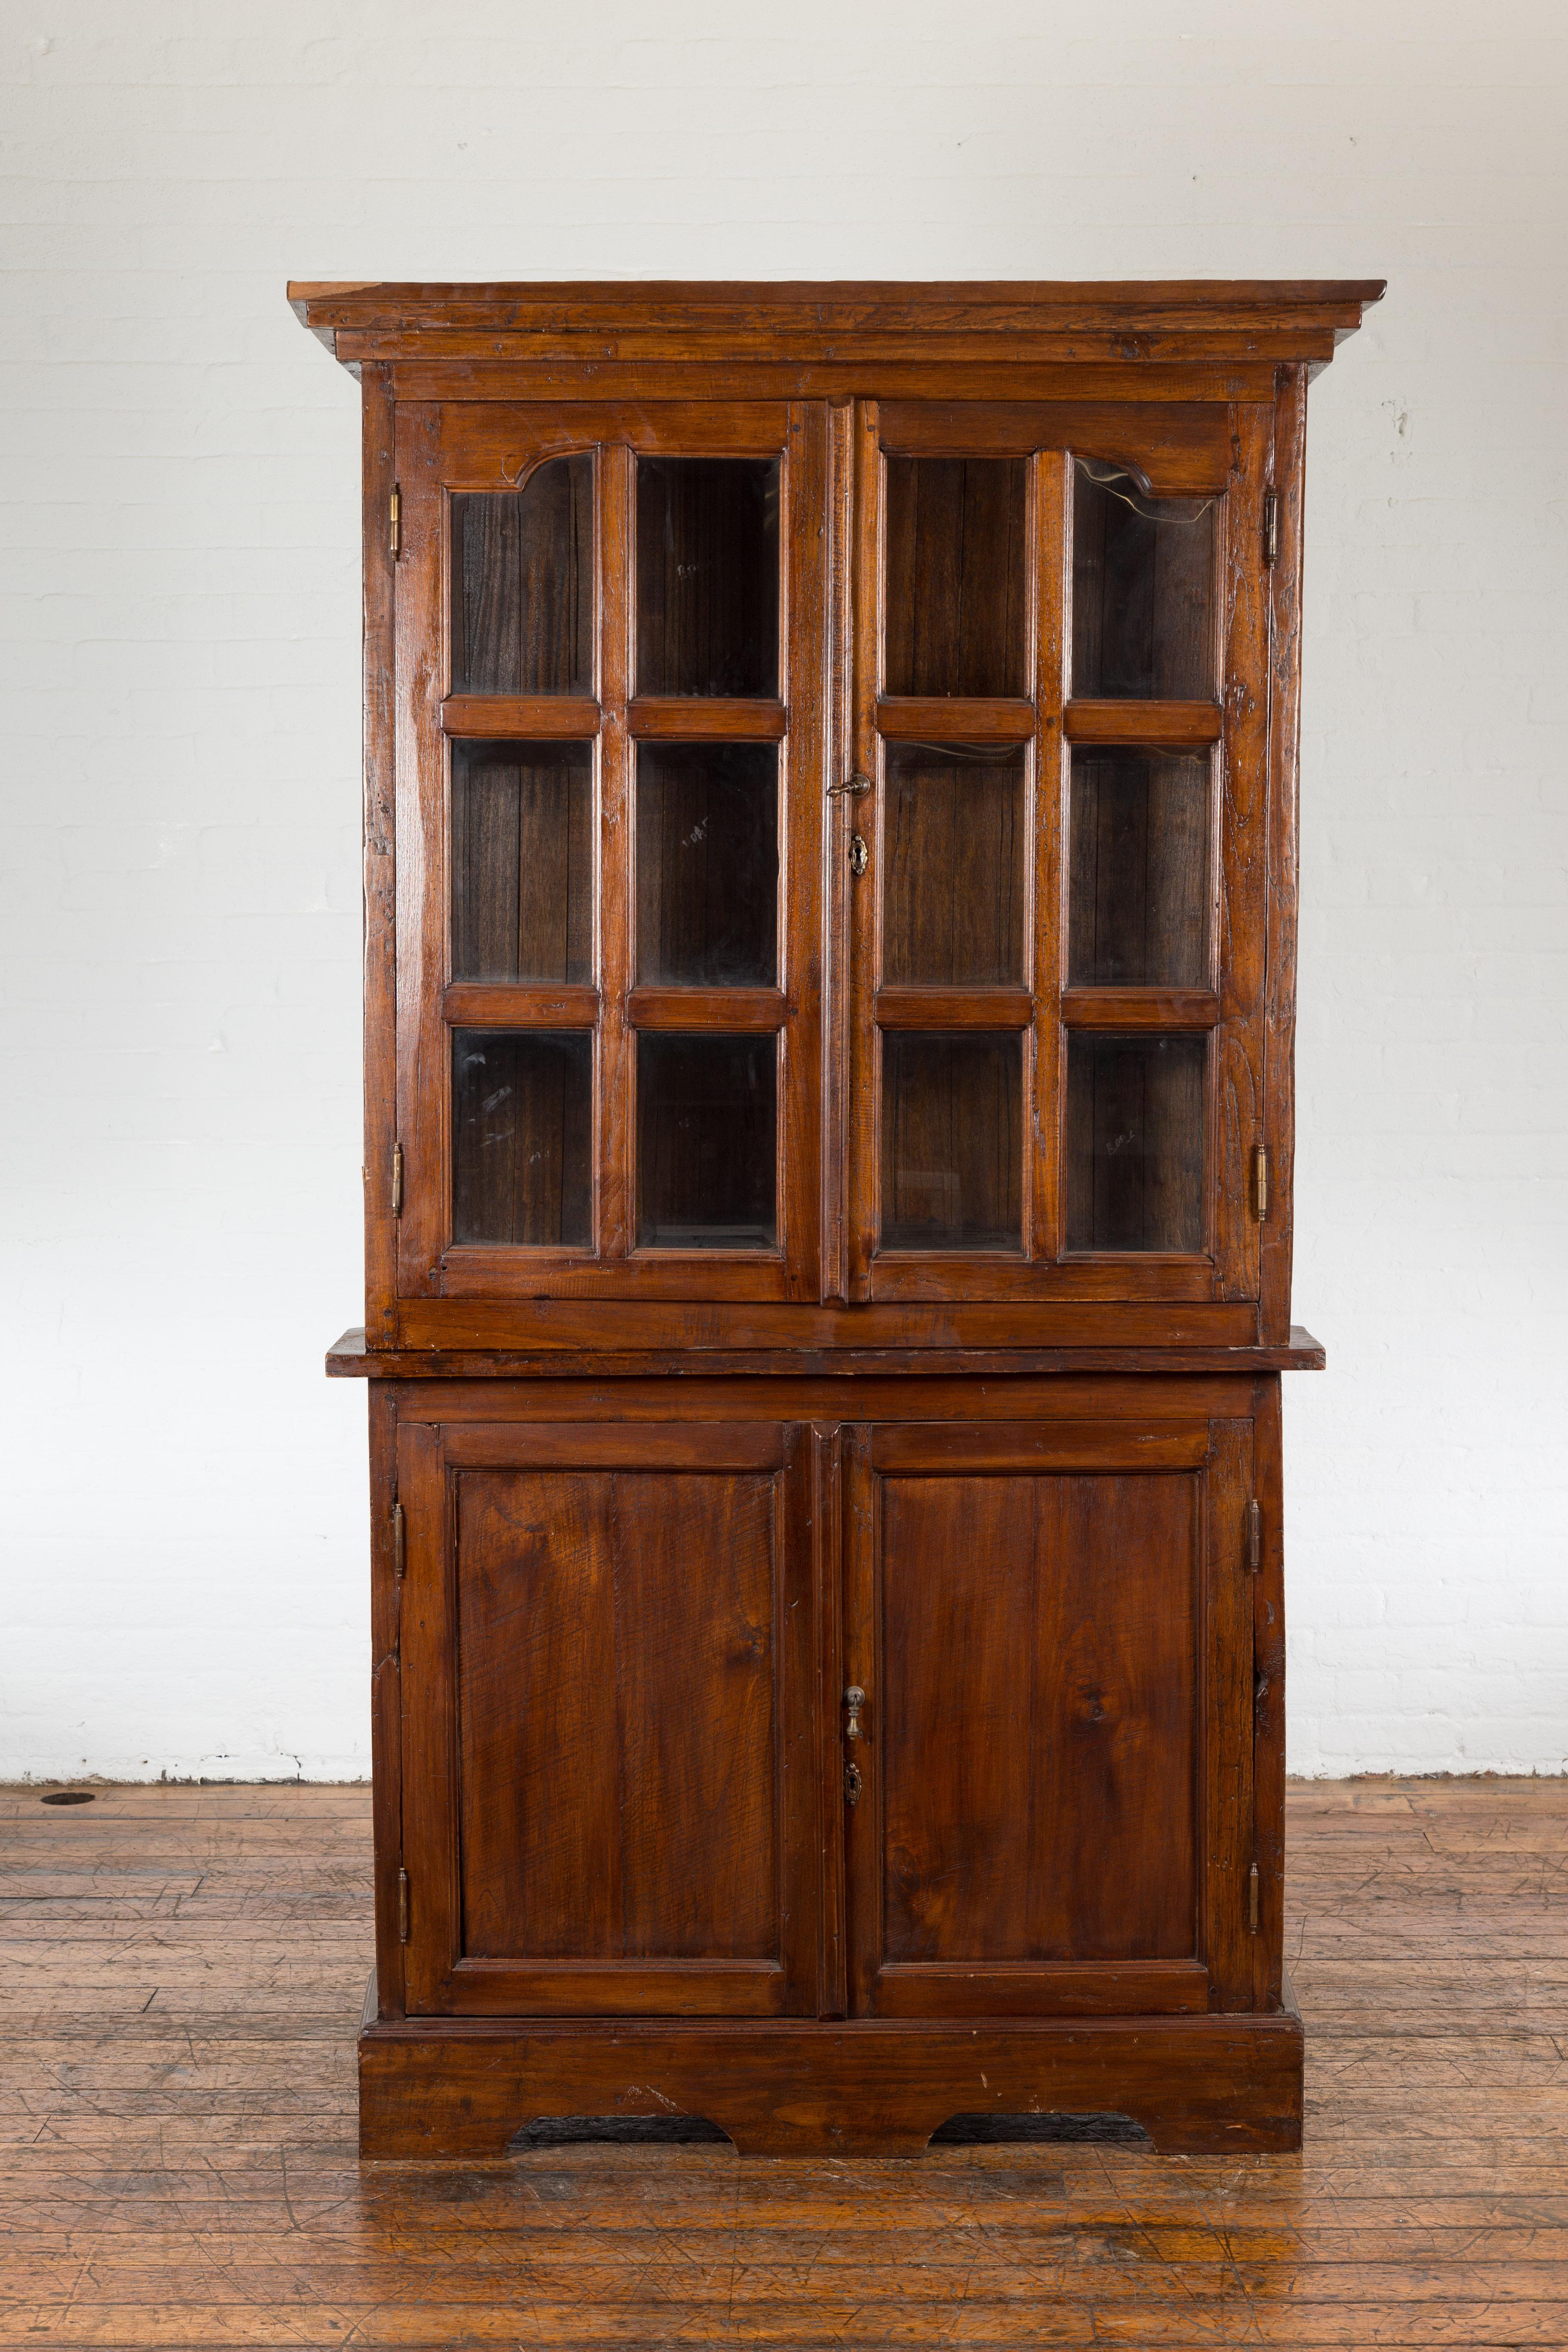 An antique Javanese Dutch Colonial period two-part display corner cabinet from the early 20th century with paneled glass doors in the upper section and wooden doors in the lower one. This antique Javanese Dutch Colonial corner cabinet from the early